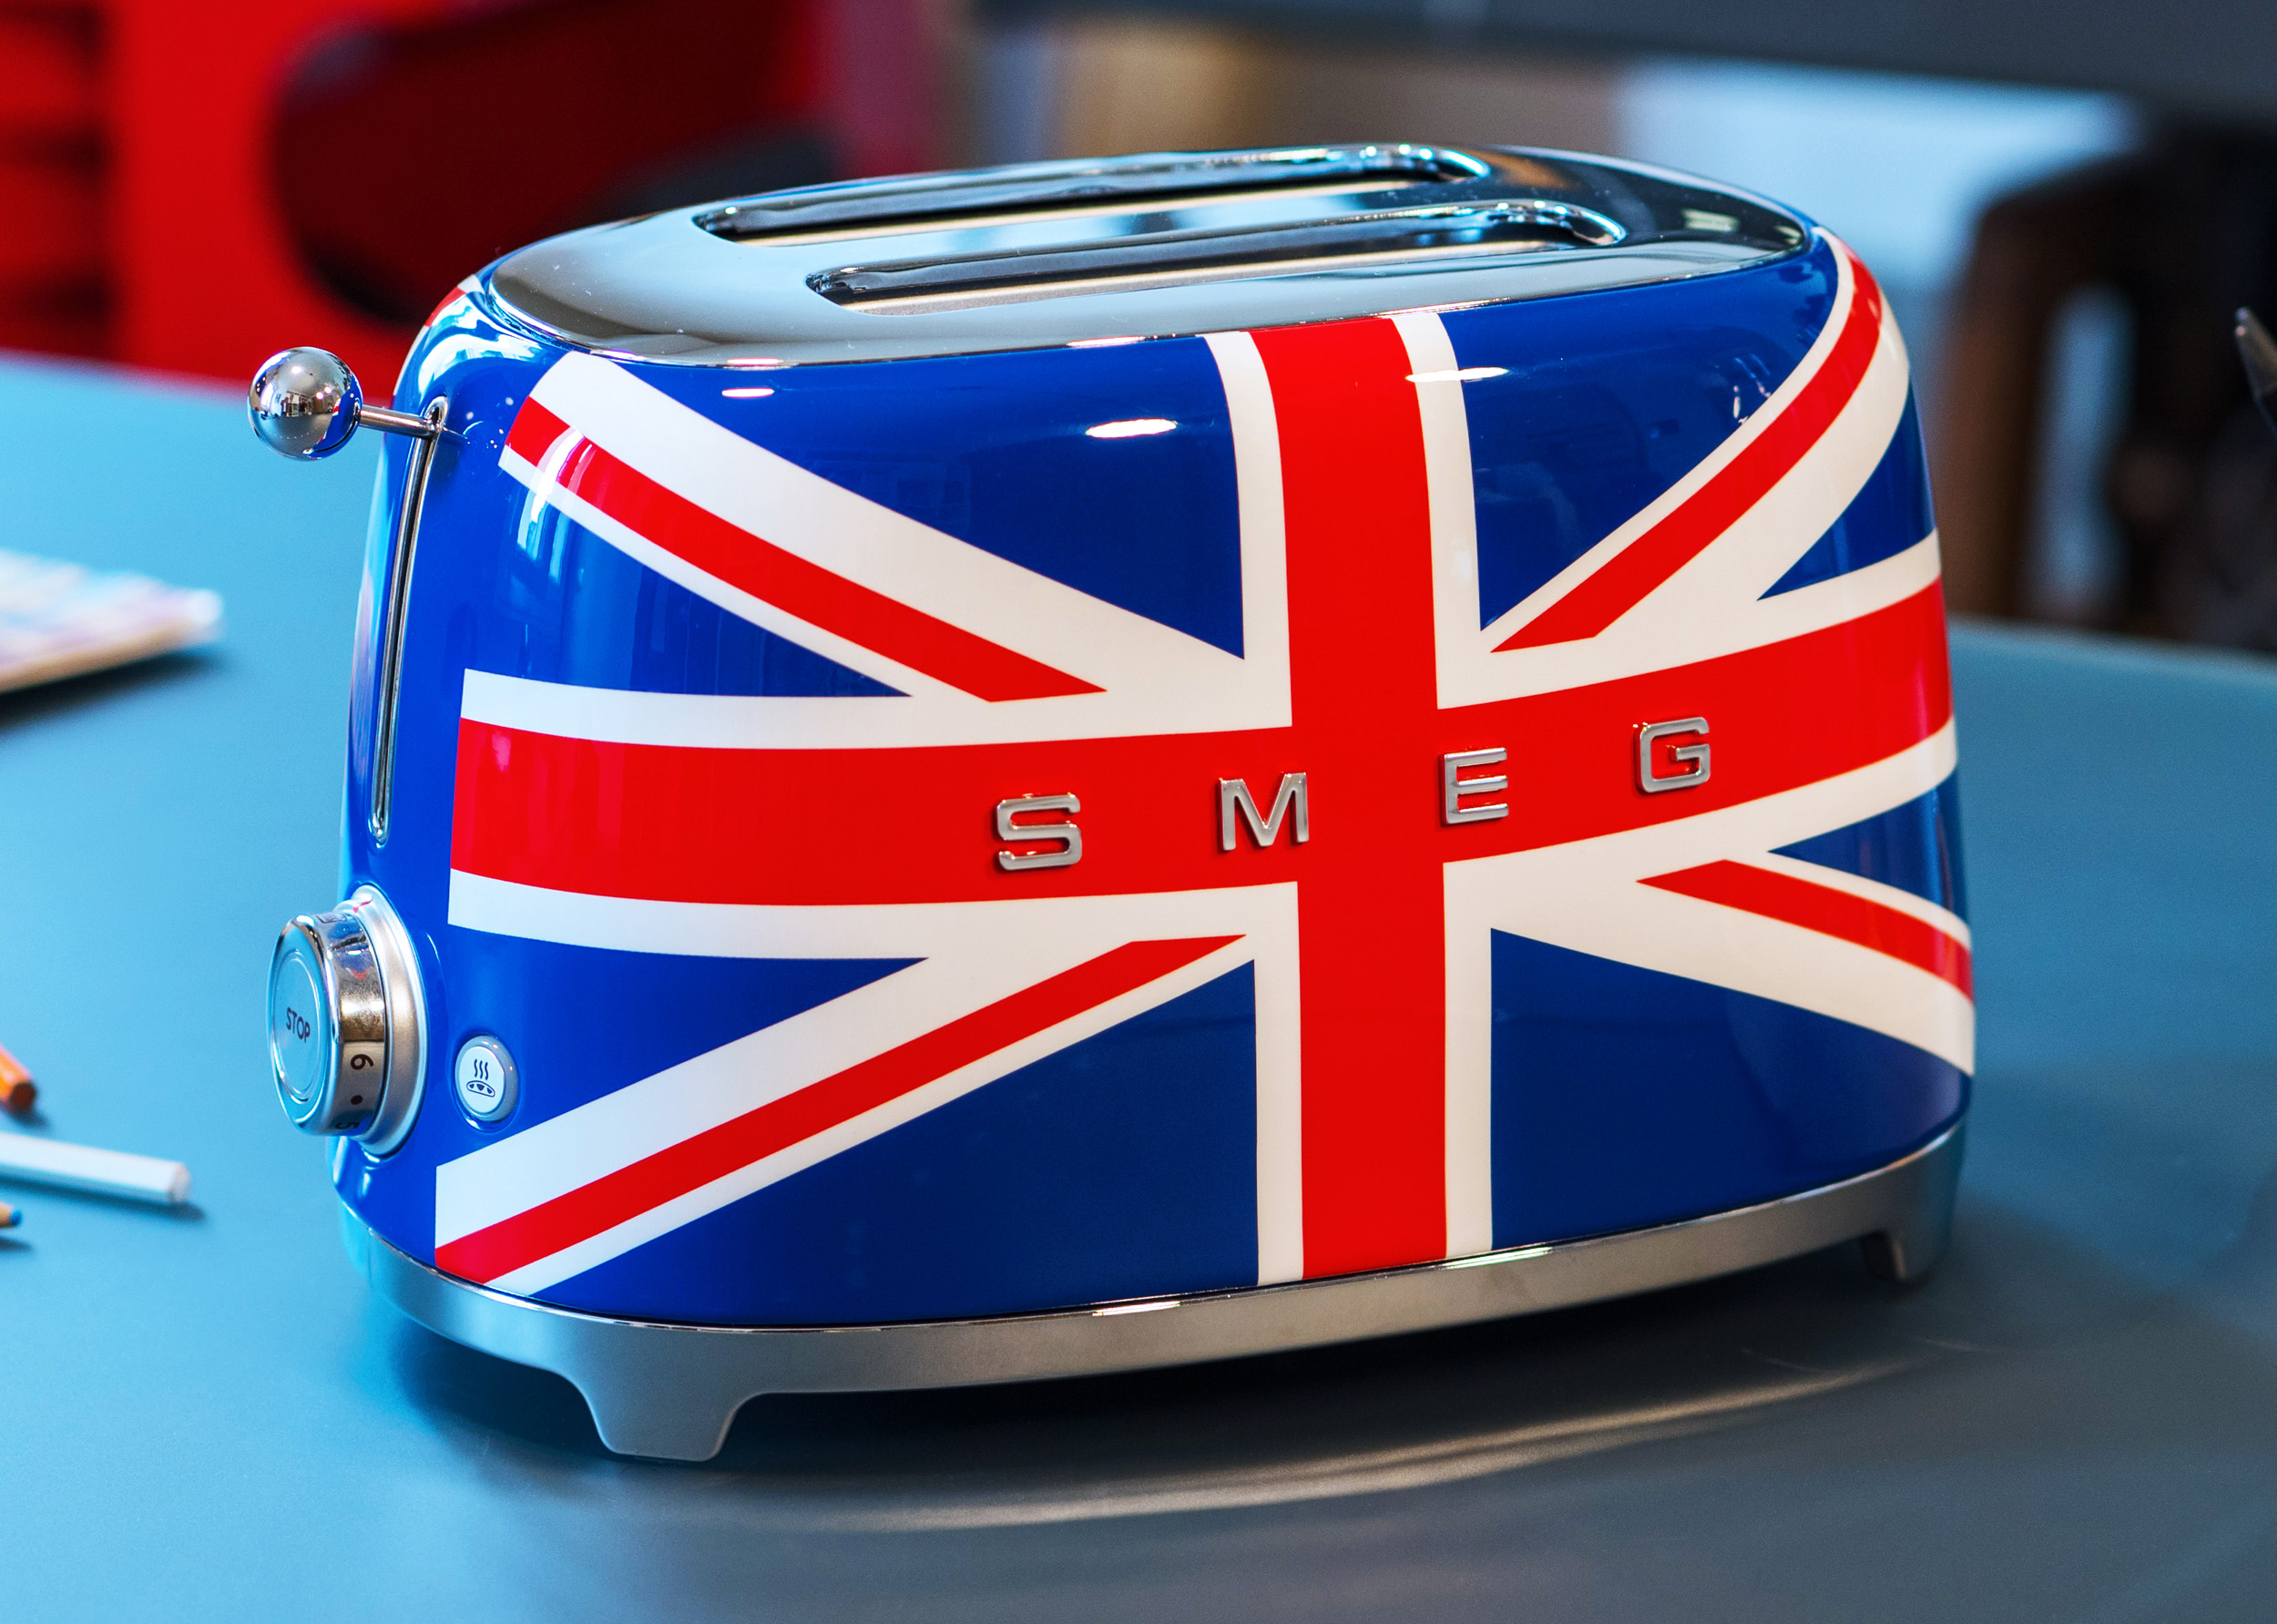 Smeg UK  Welcome To Our Official Online Shop